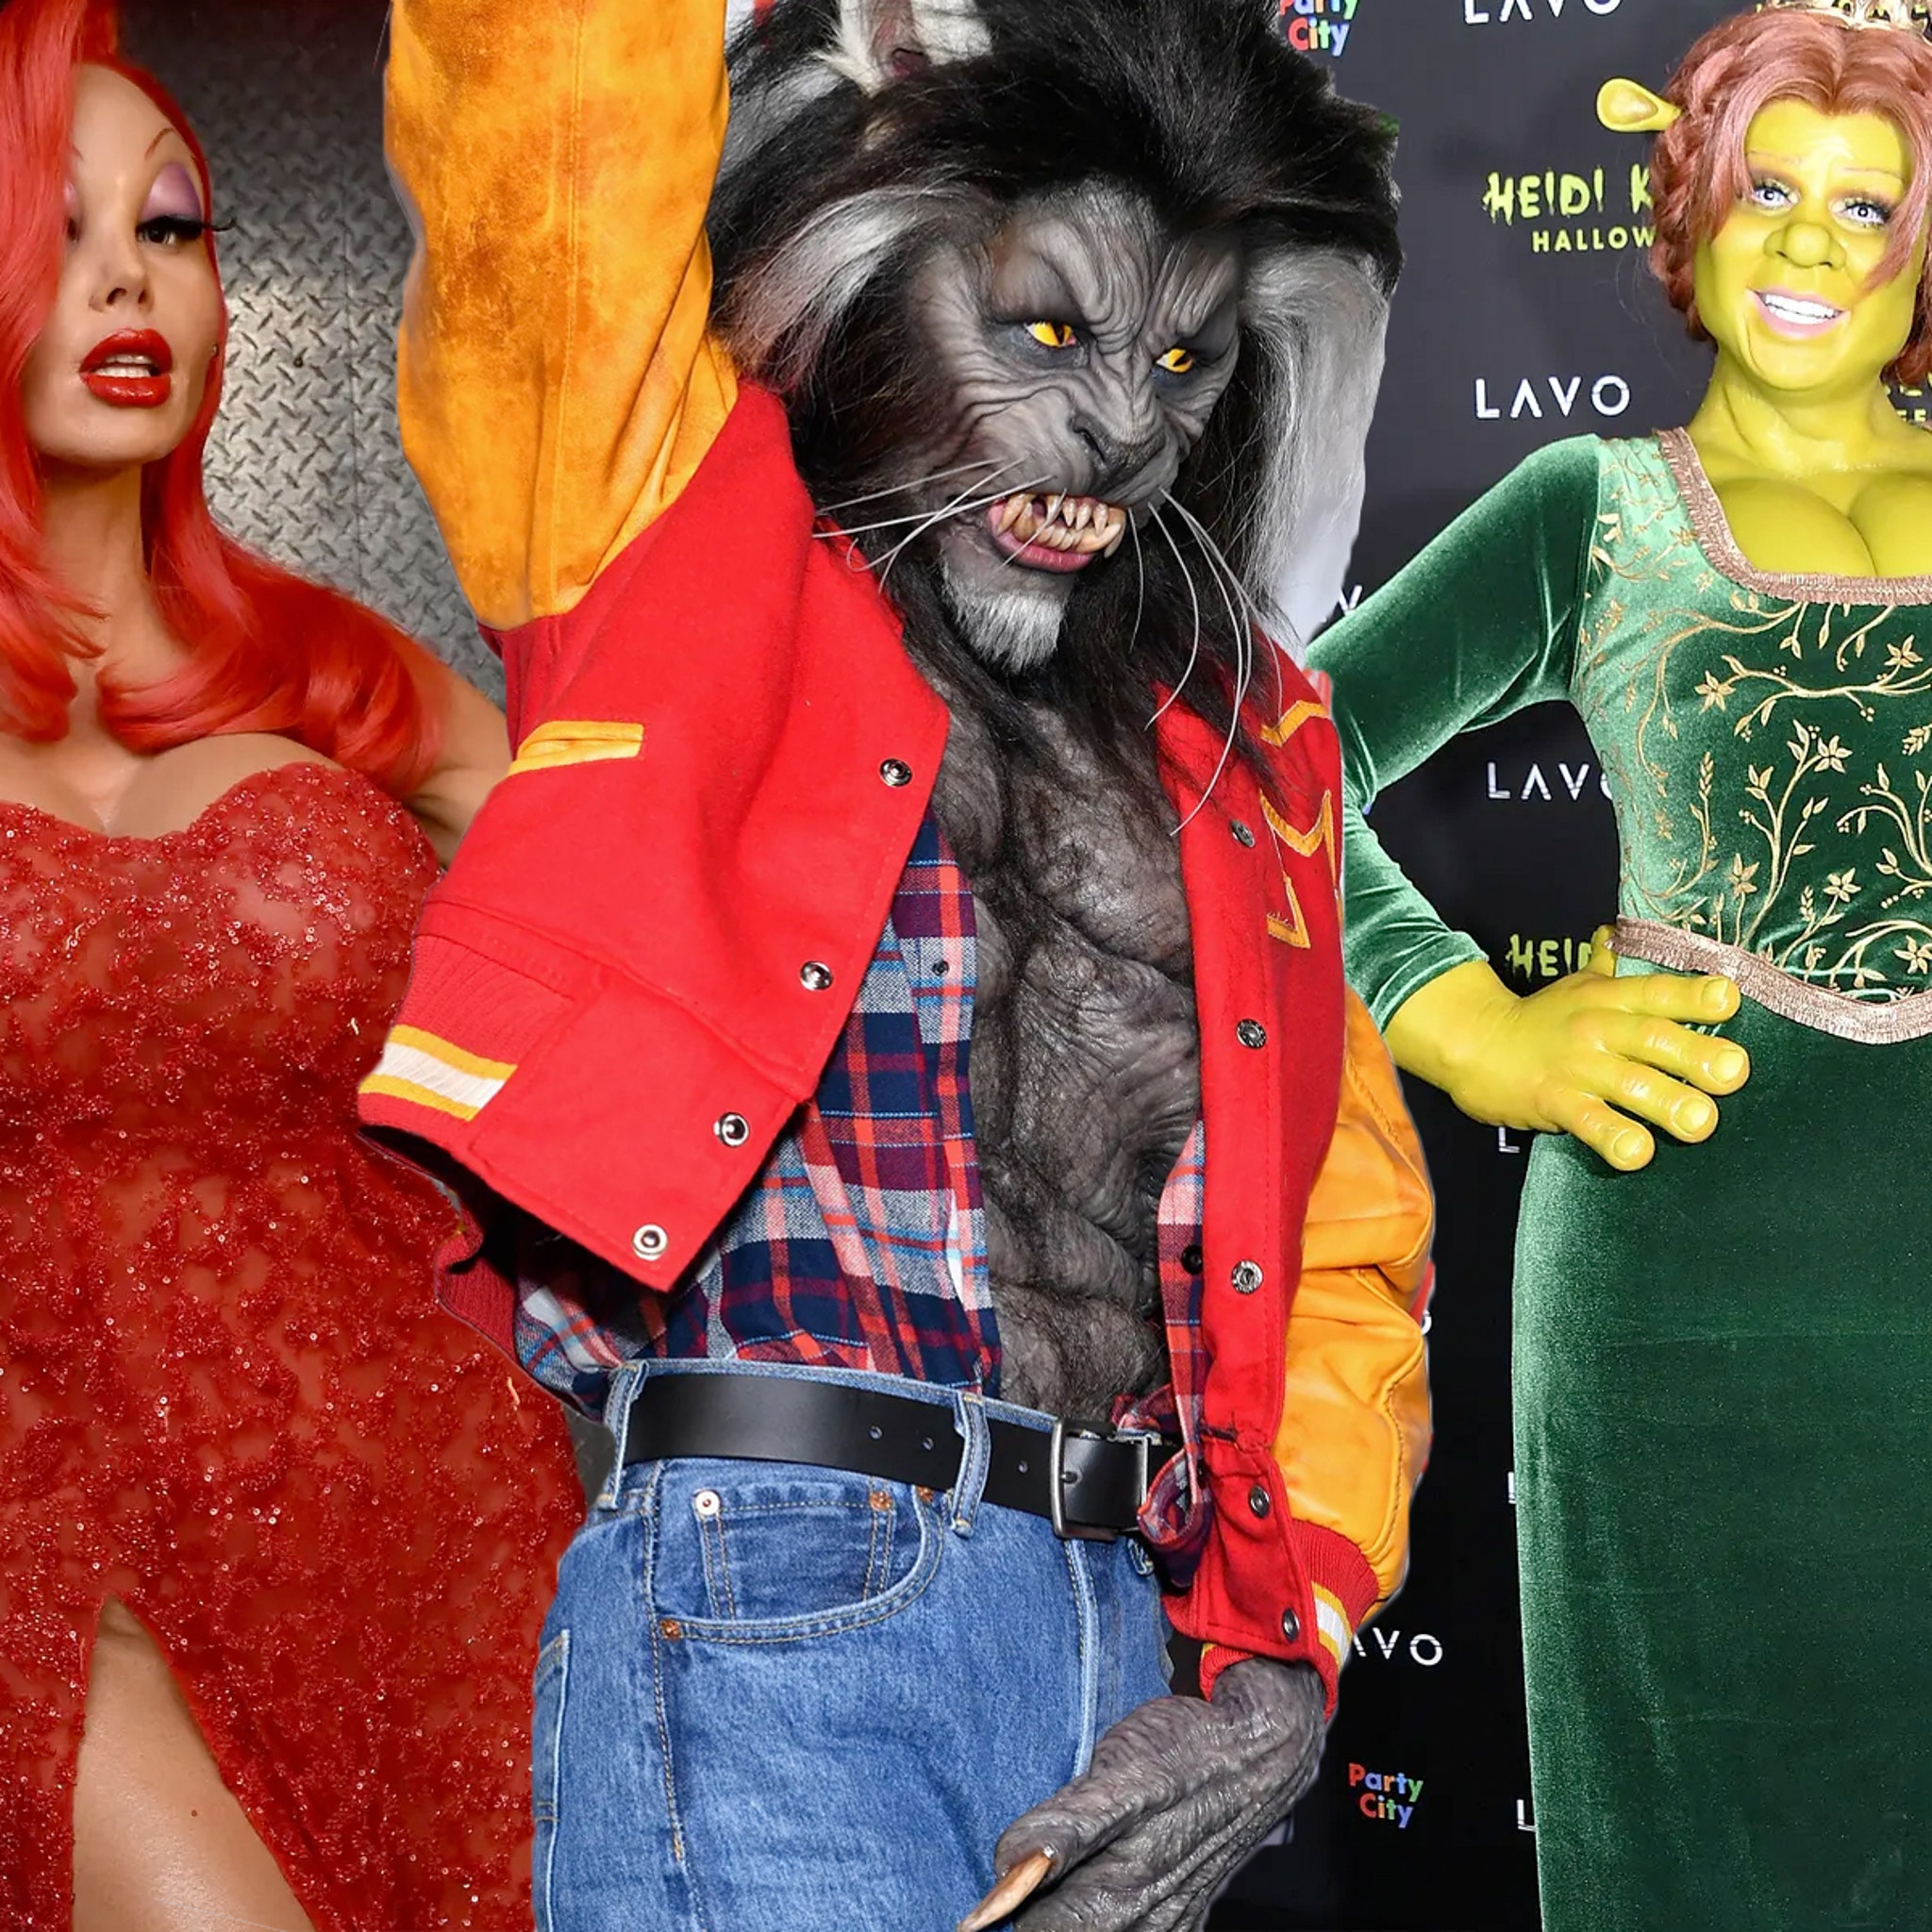 Heidi Klum's Halloween Party Is Back On and Her Costume Is Her 'Best' Yet